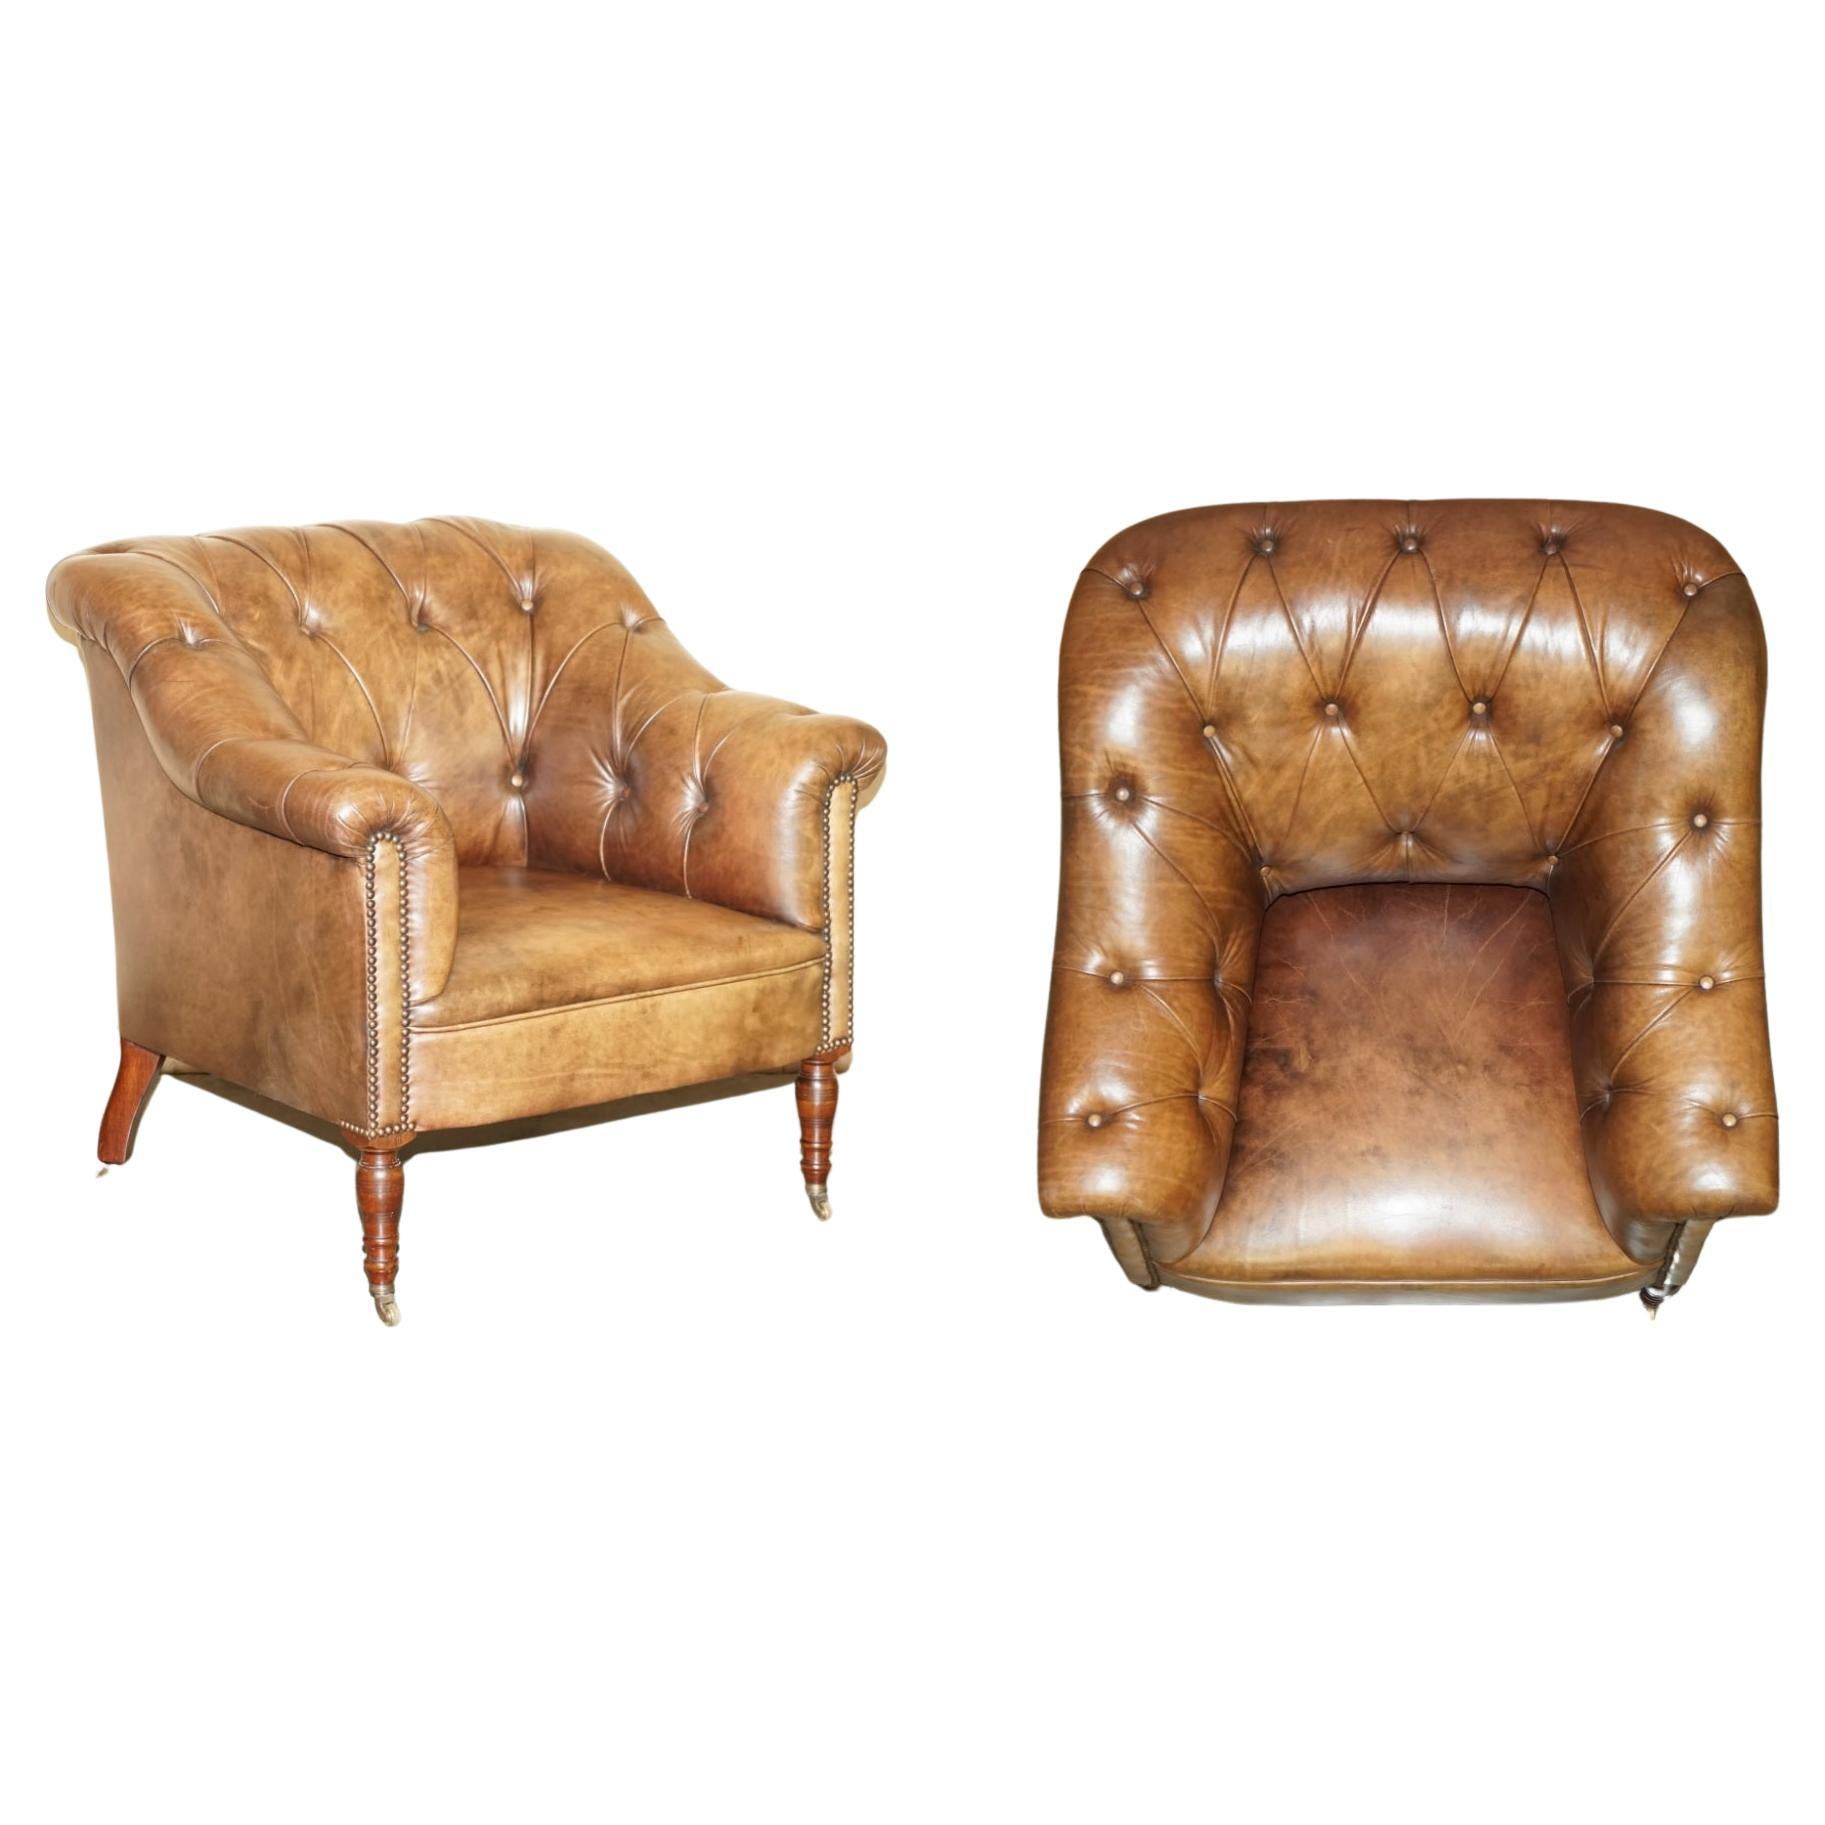  GEORGE SMiTH SOMERVILLE BROWN LEATHER CHESTERFIELD ARMCHAIR For Sale